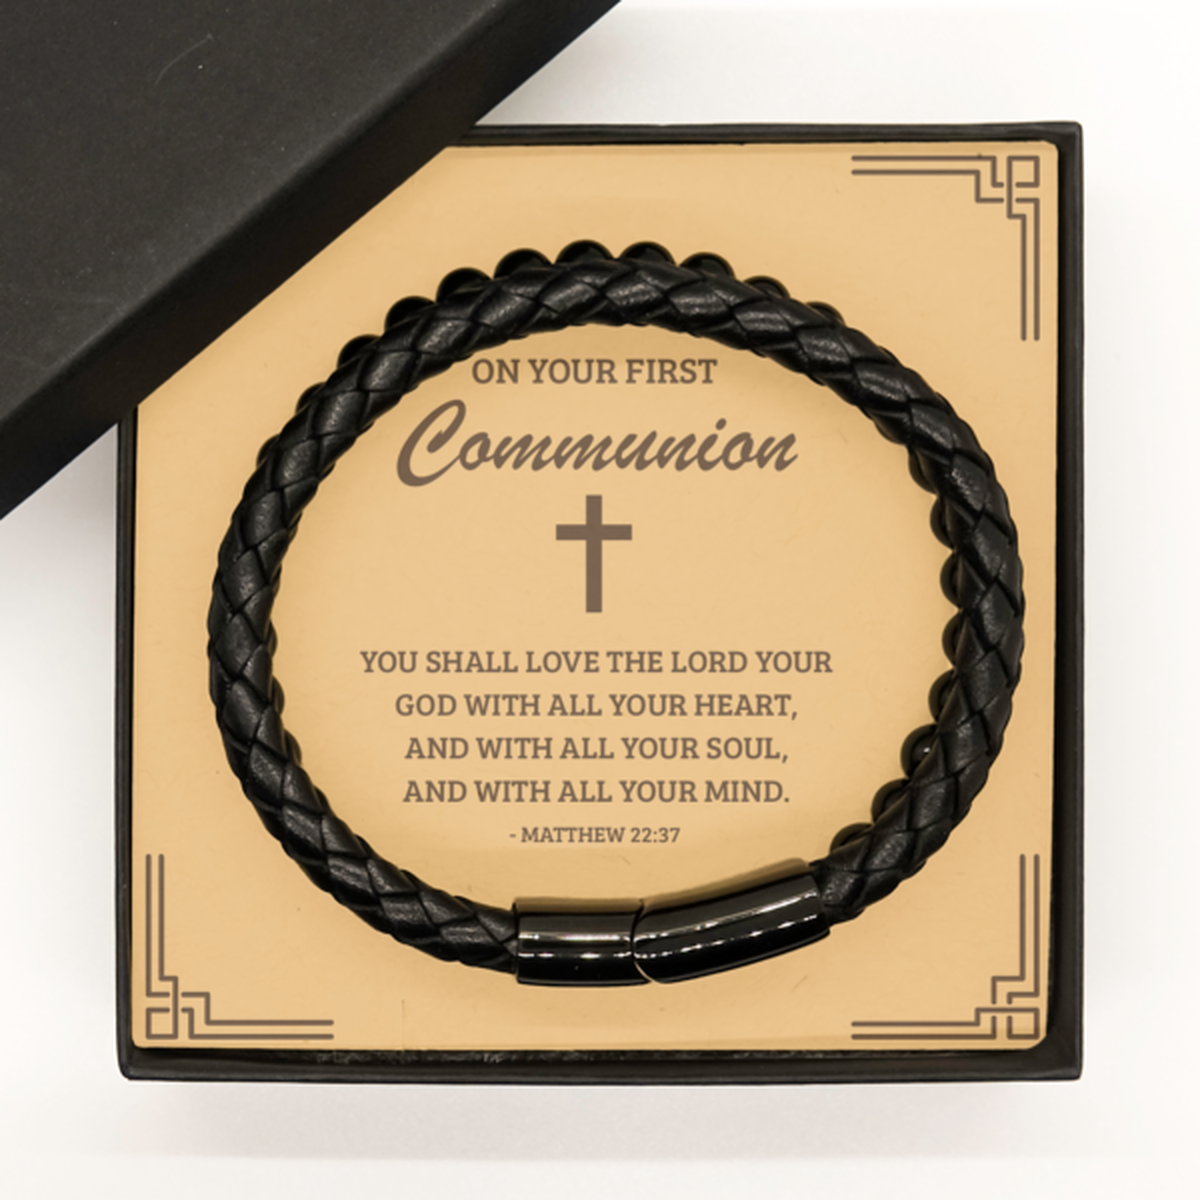 First Communion Gifts for Teenage Boys, You shall love the Lord your God, Stone Leather Bracelet with Bible Verse Message Card, Religious Catholic Bracelet for Son, Grandson, Dad, Godfather